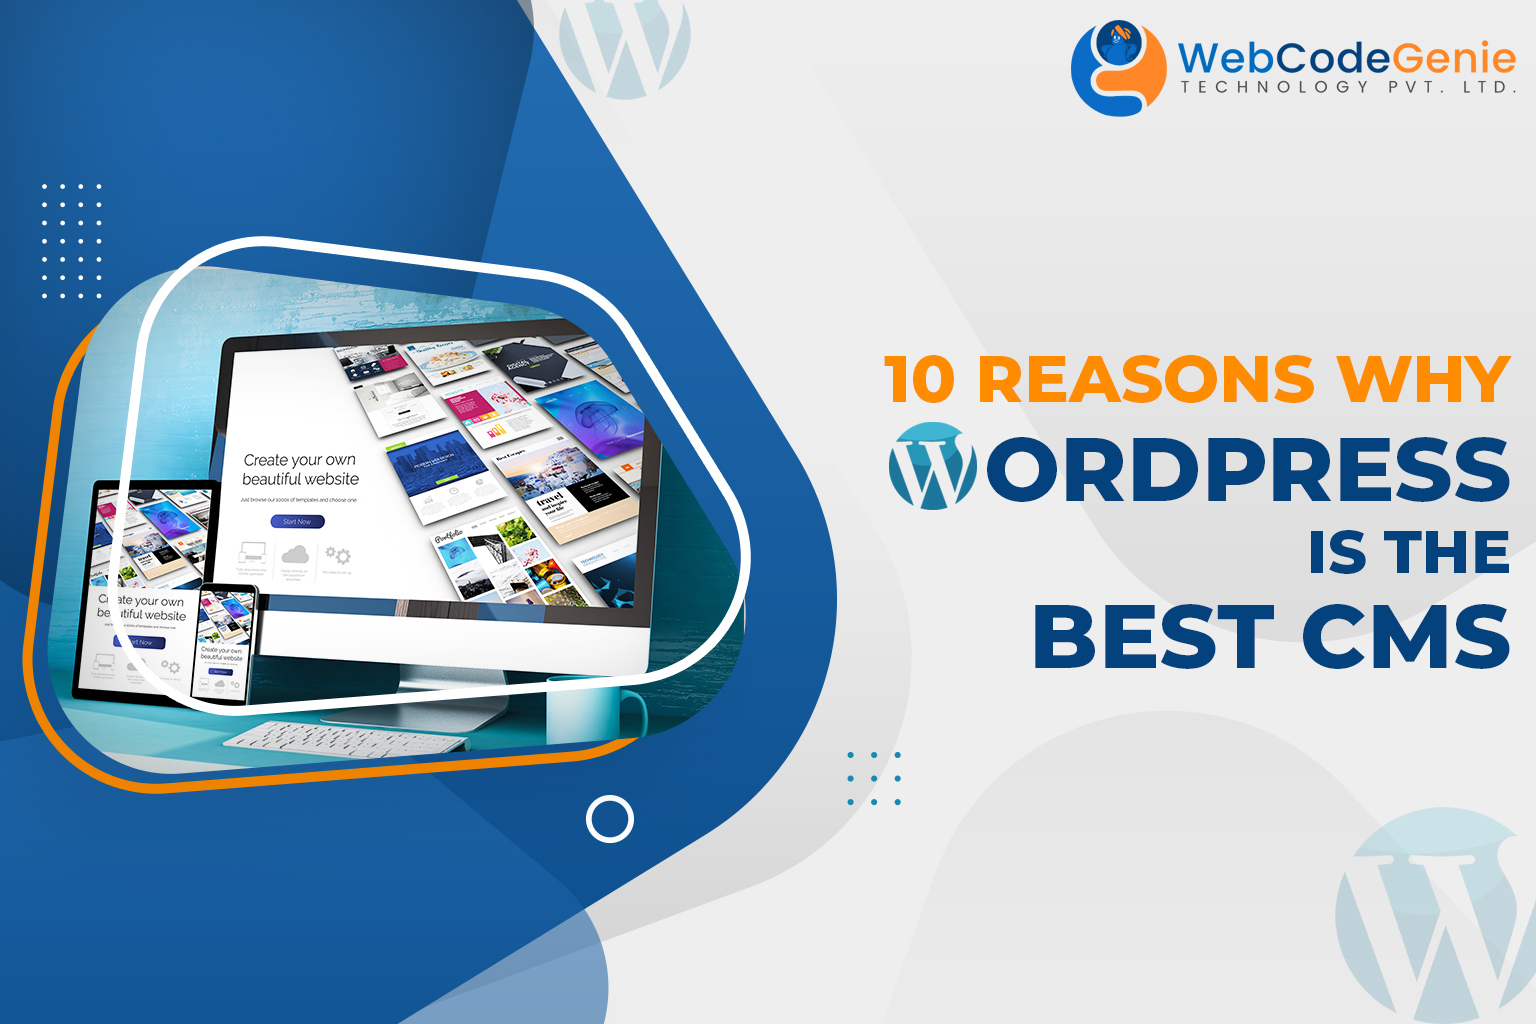 10 Reasons why WordPress is the Best CMS